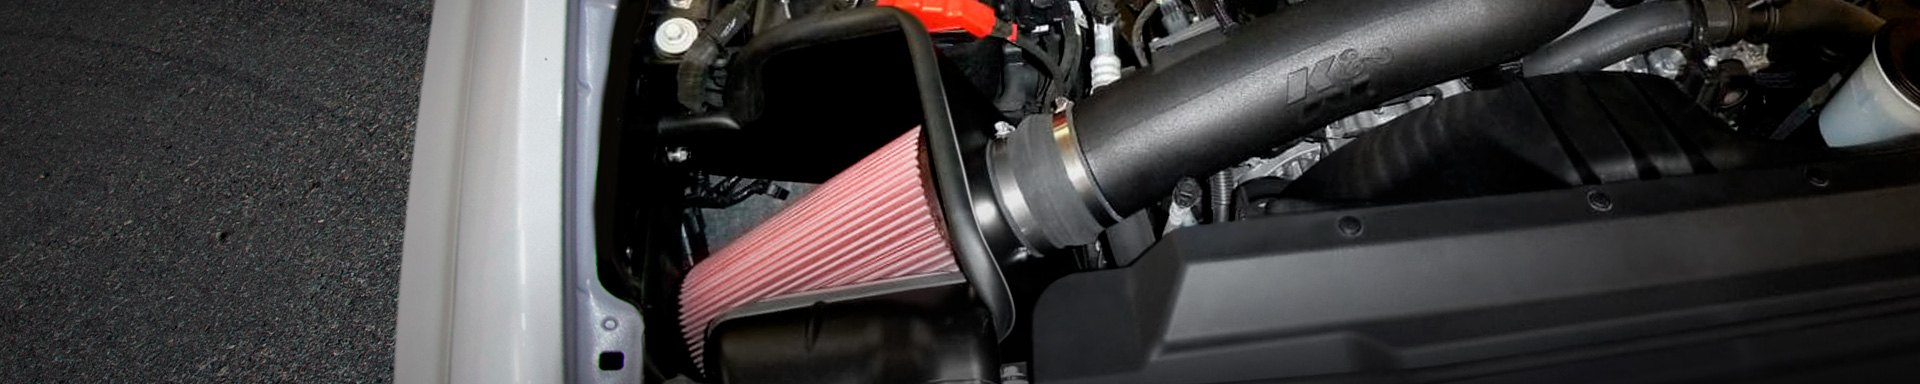 New K&N Supercharger Air Intakes For Ford F-250 Super Duty